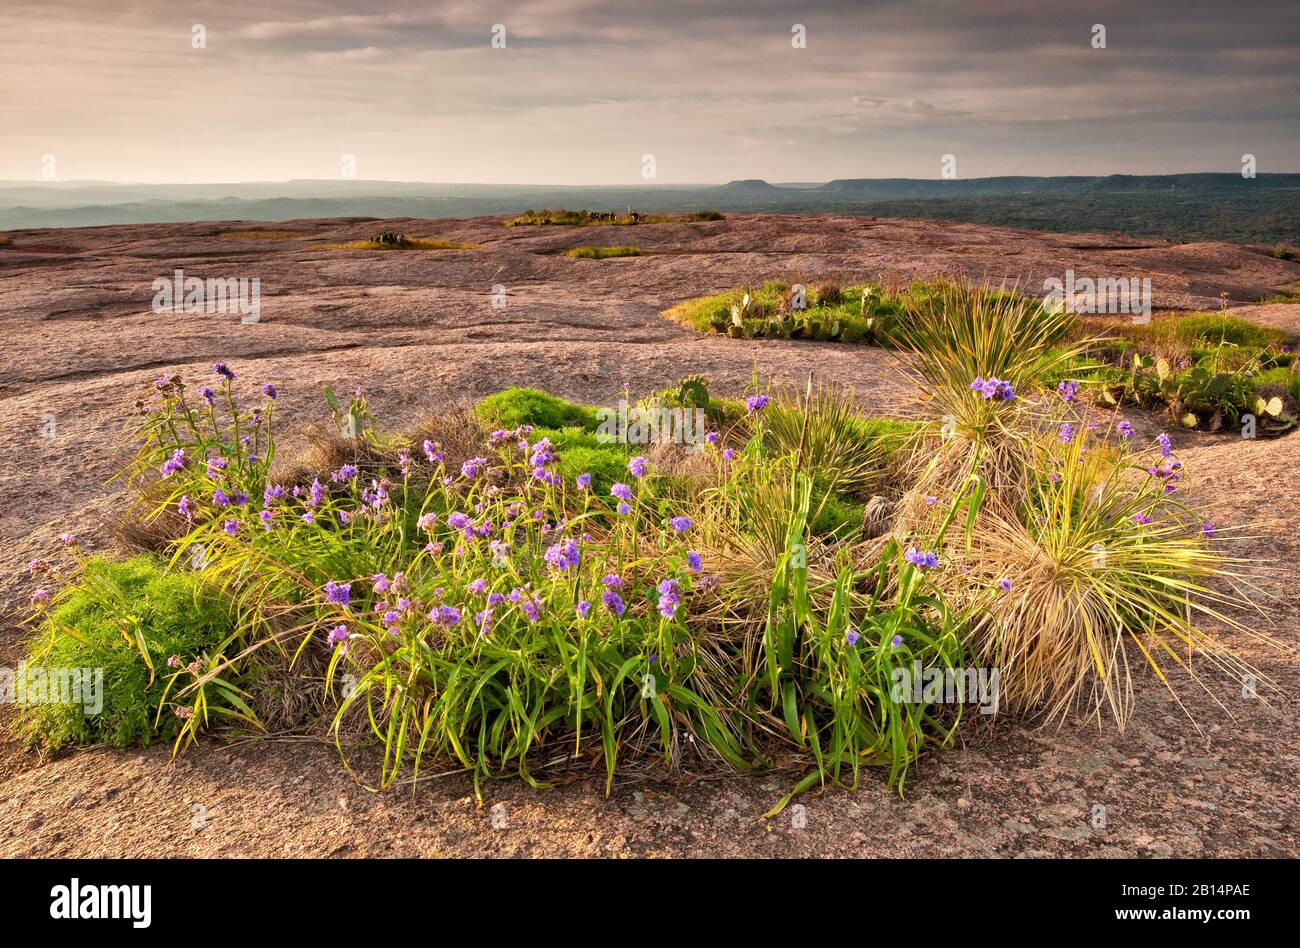 Spiderwort flowers blooming in springtime at vernal pool at main dome in Enchanted Rock State Natural Area in Hill Country near Fredericksburg, Texas Stock Photo